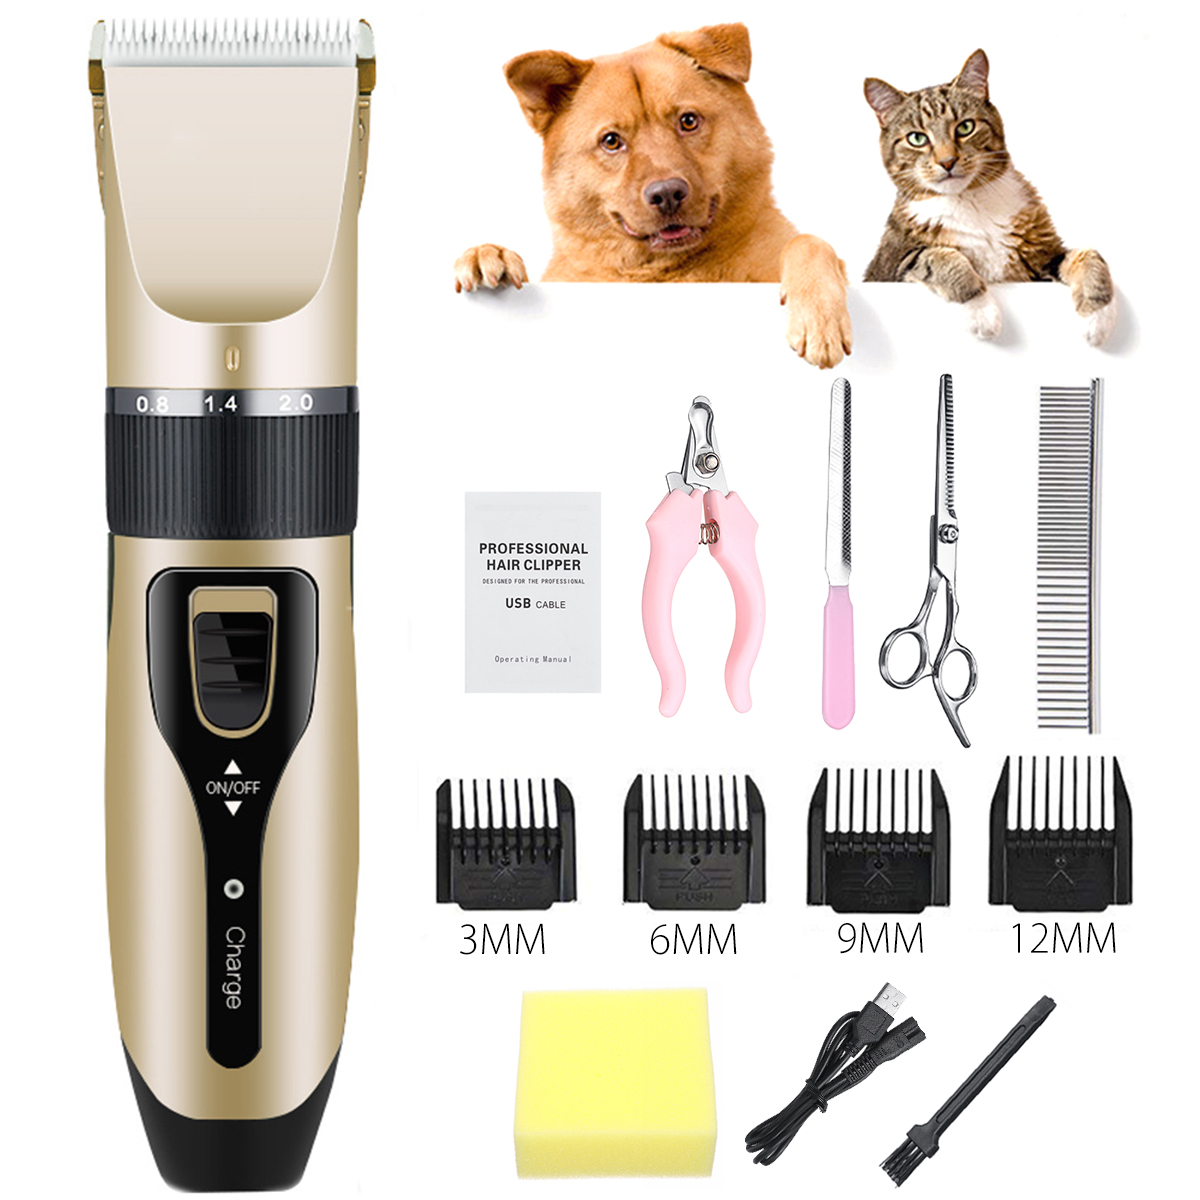 

Professional Pet Cat Dog Clipper Grooming Electric USB Rechargeable Hair Trimmer Kit